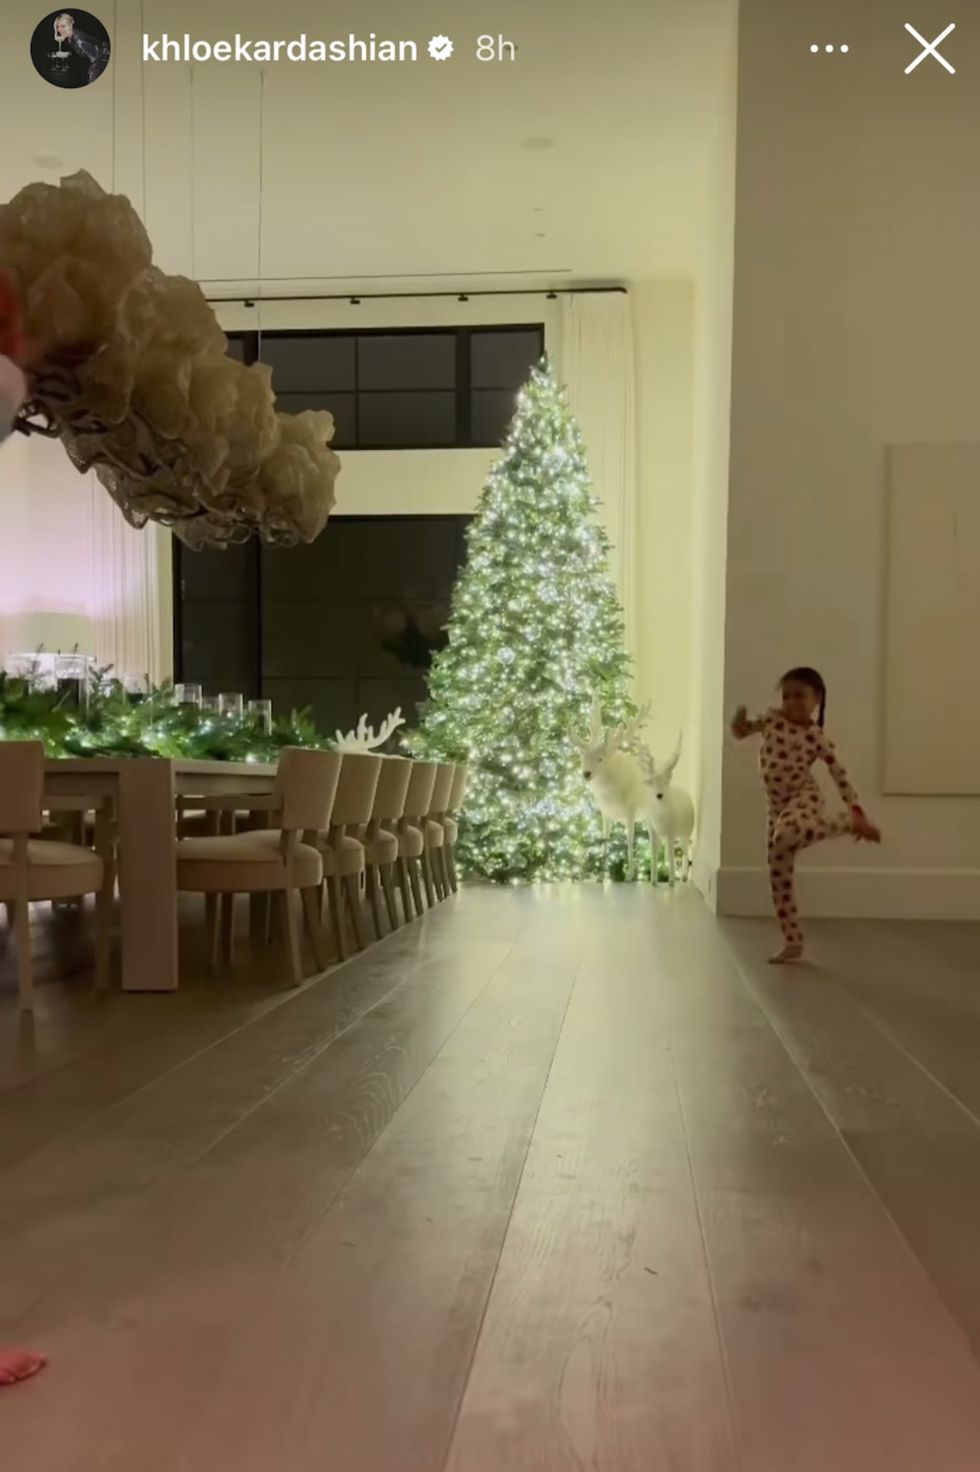 a child walking in a room